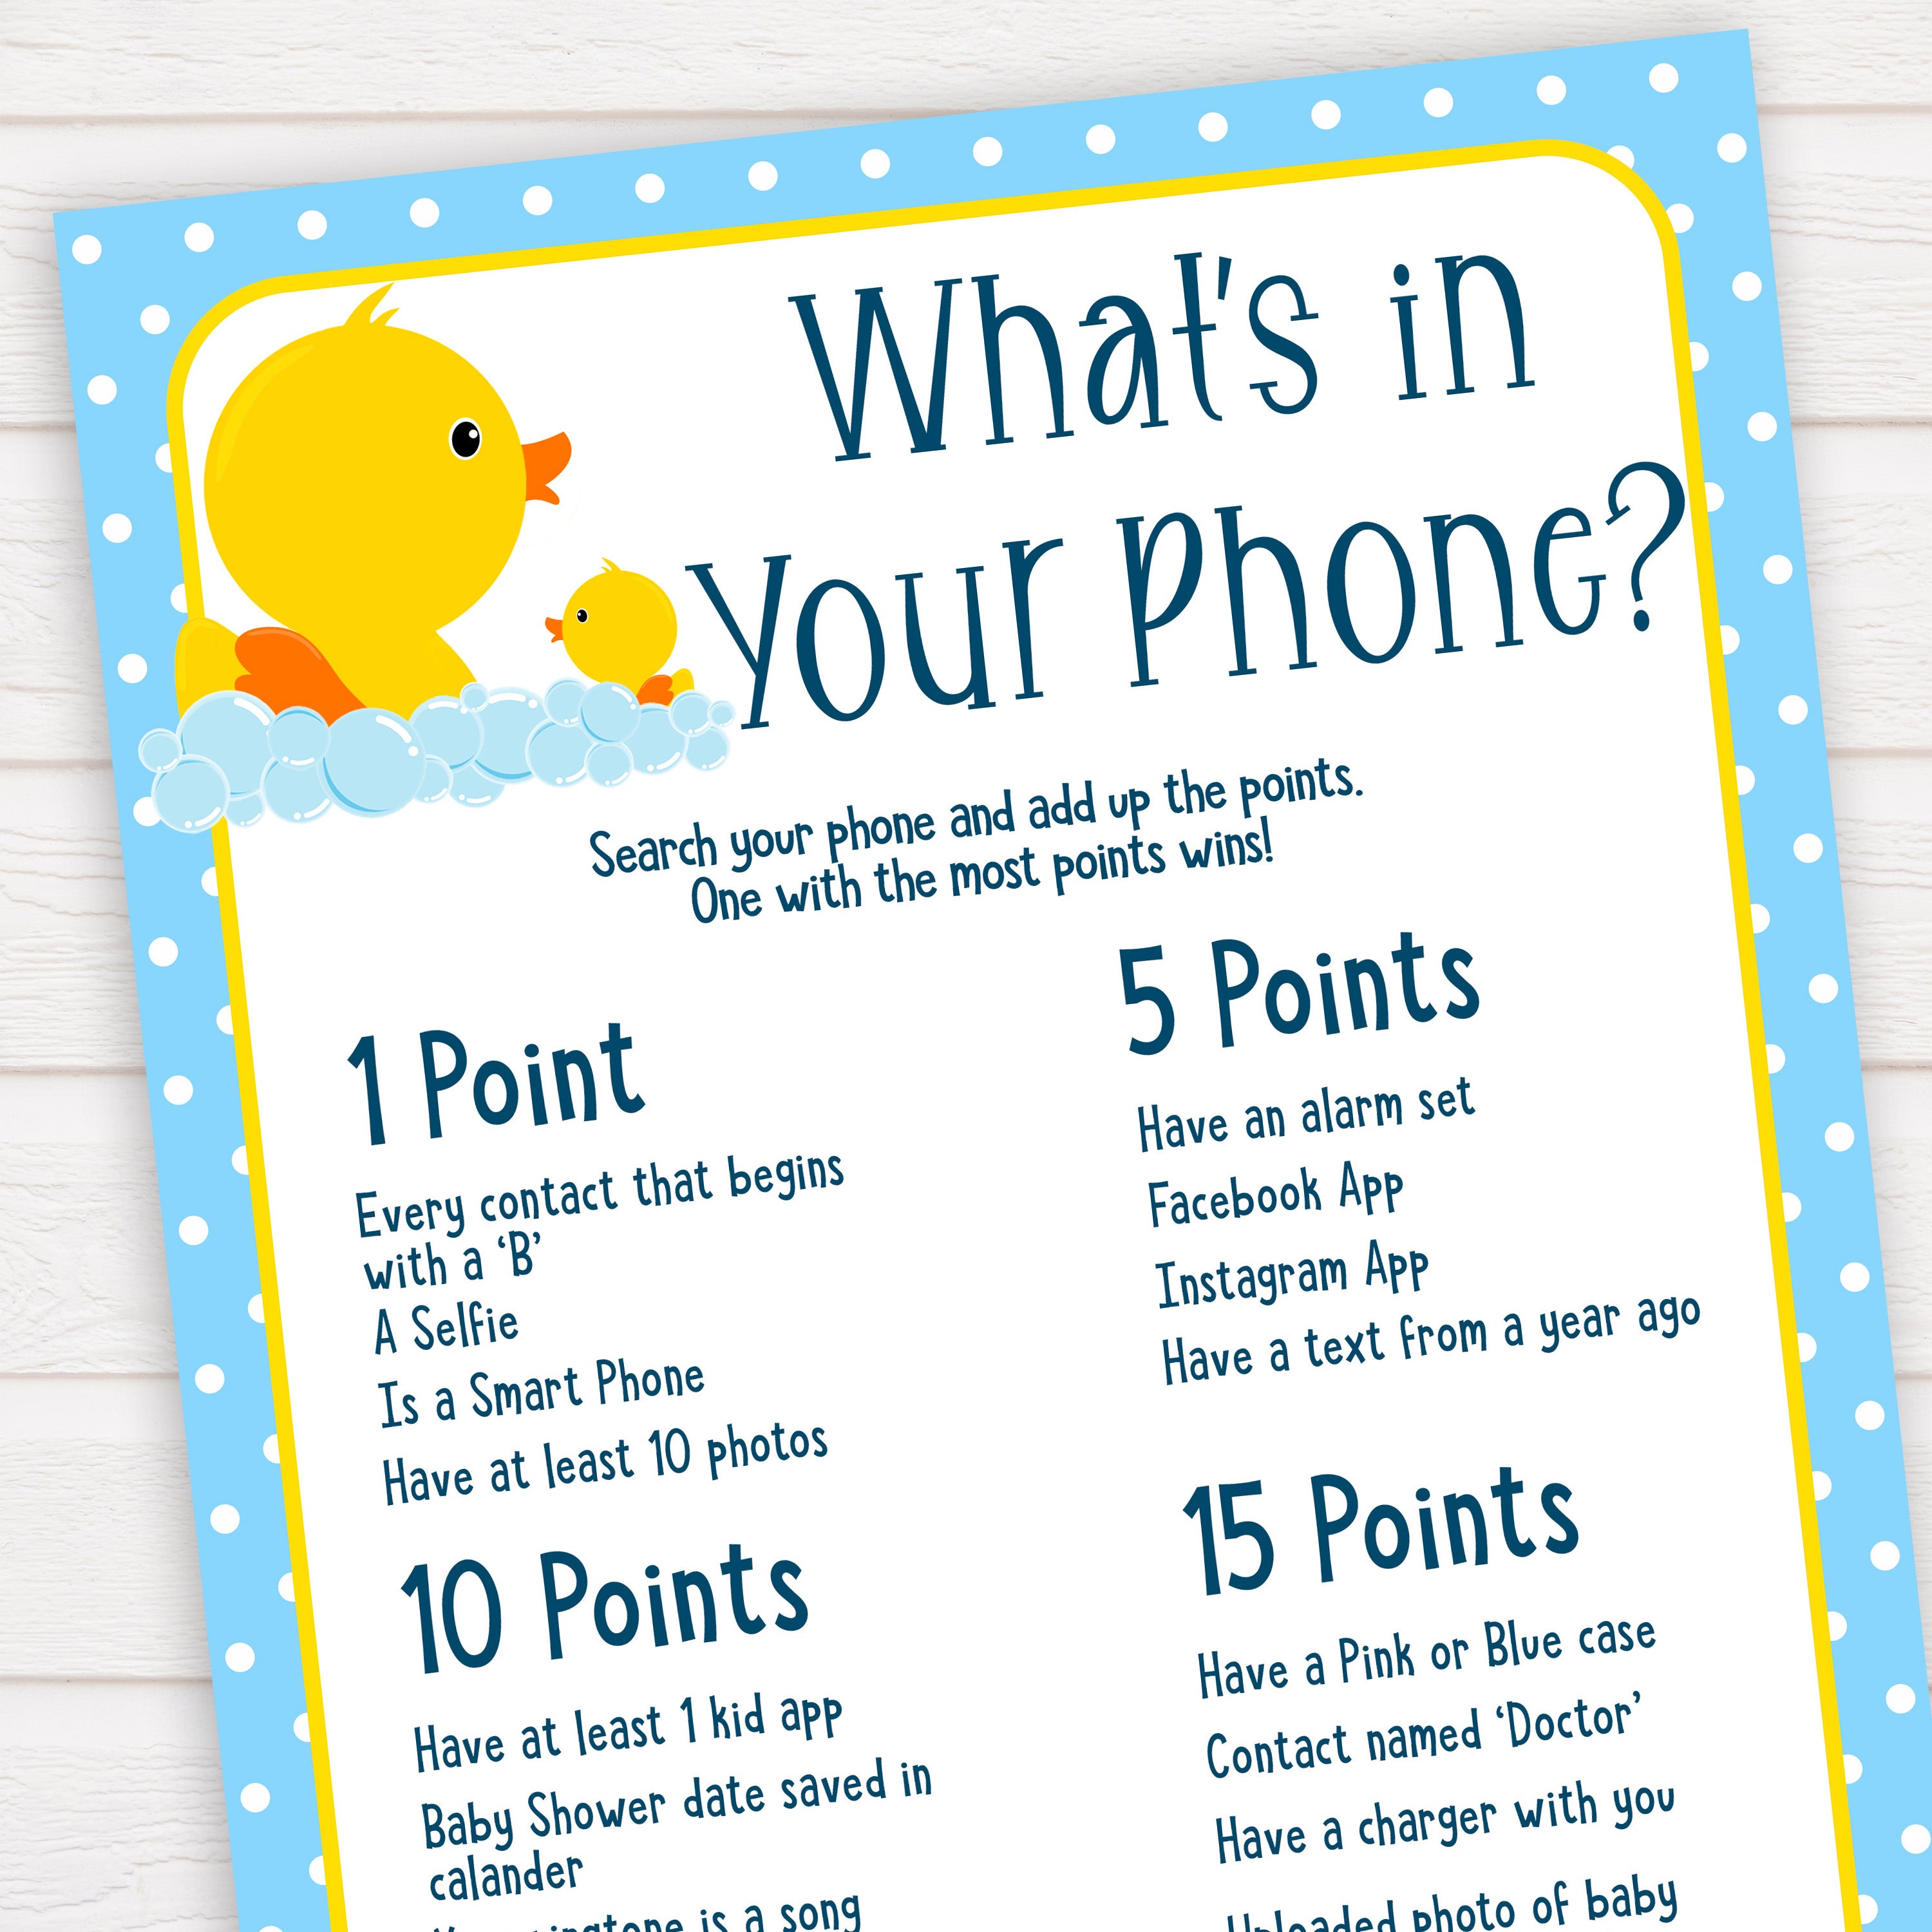 rubber ducky baby games, whats in your phone baby game, printable baby games, baby shower games, rubber ducky baby theme, fun baby games, popular baby games